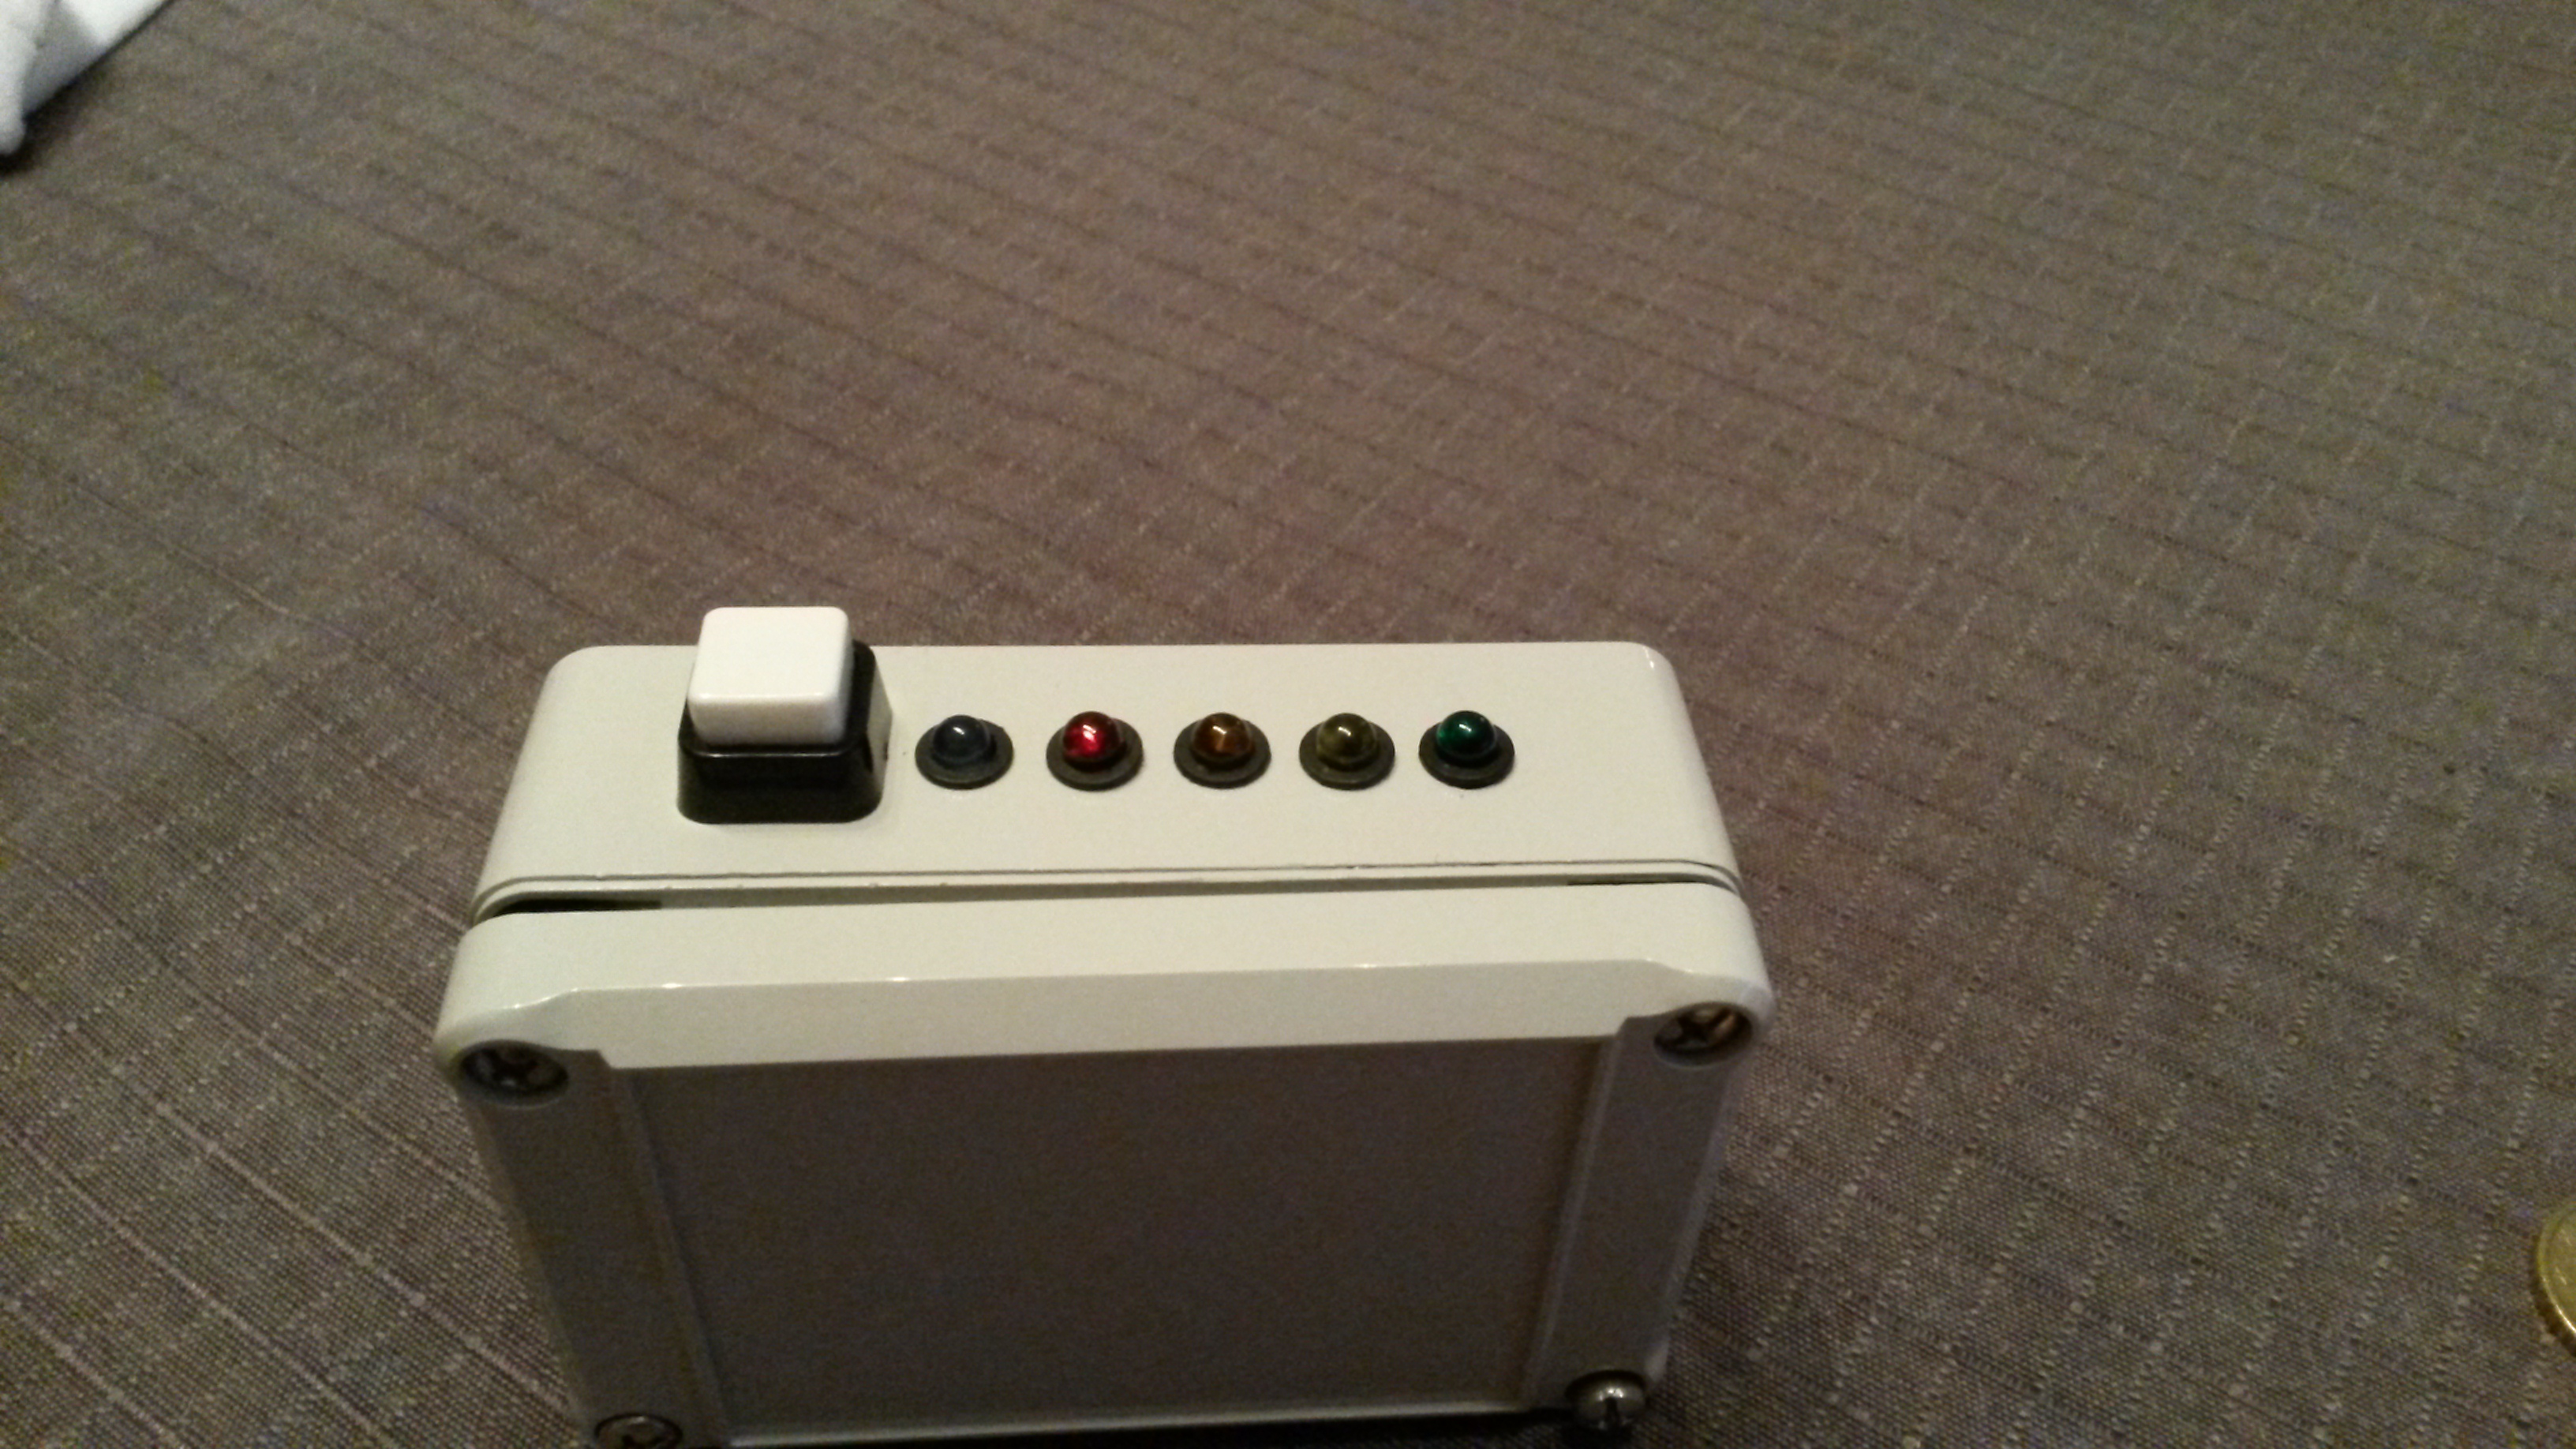 mounted controller indicator lights